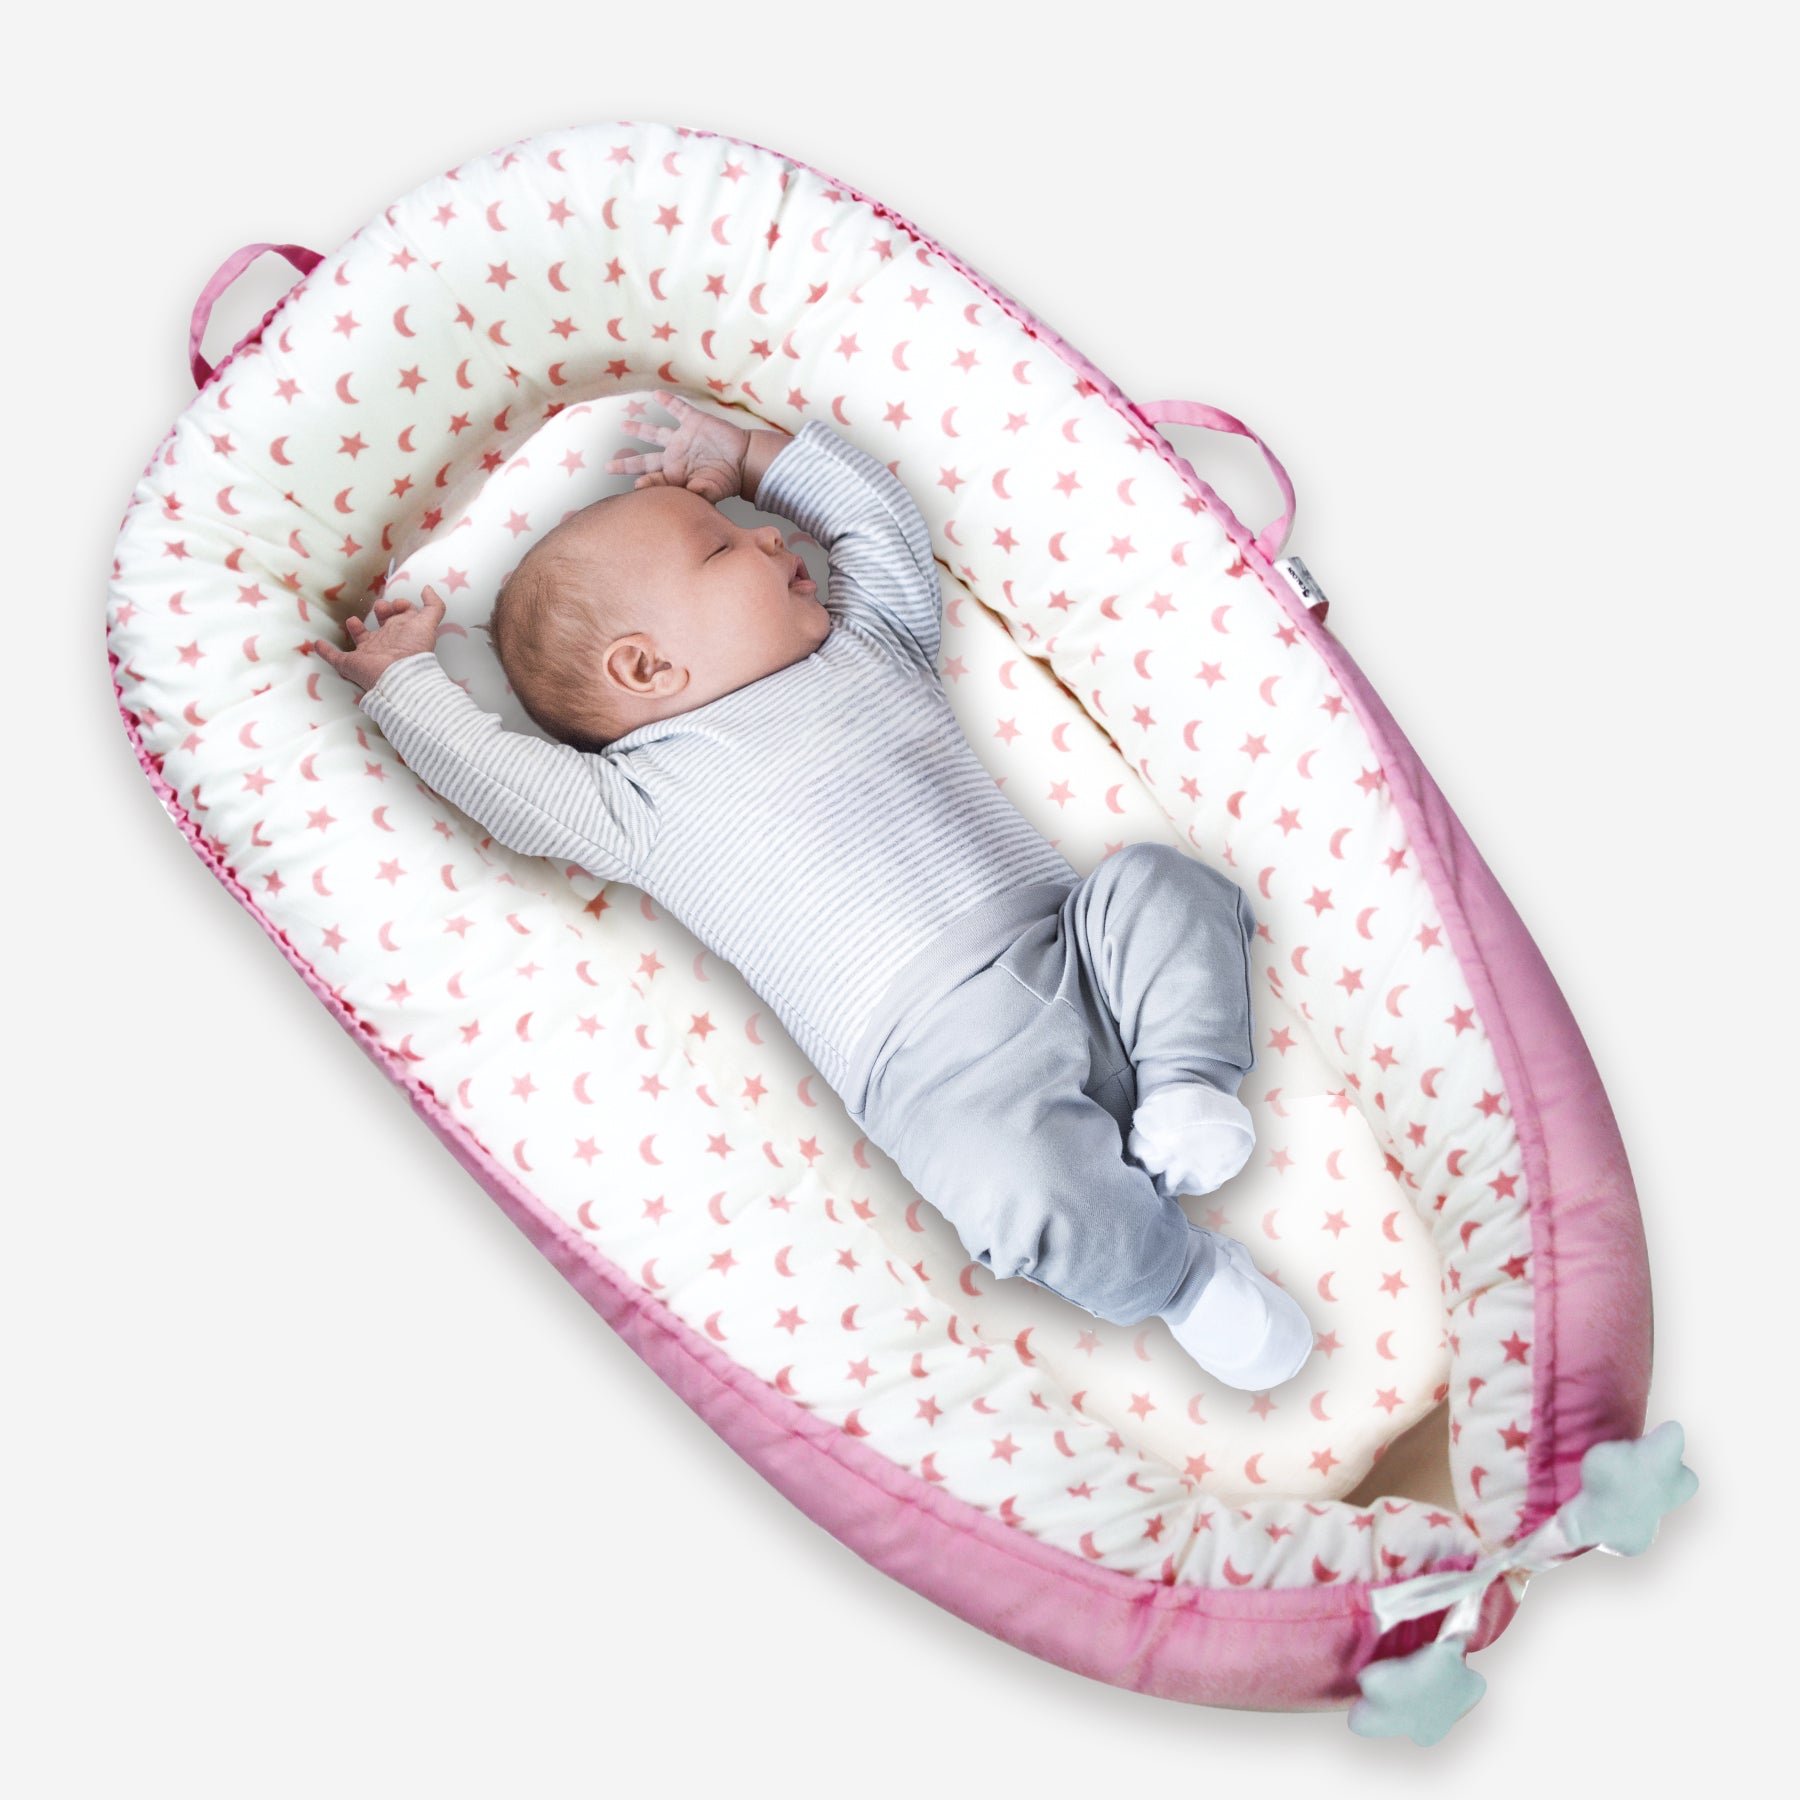 Calody Baby Lounger, Baby Lounger for Baby in Bed, Breathable Soft